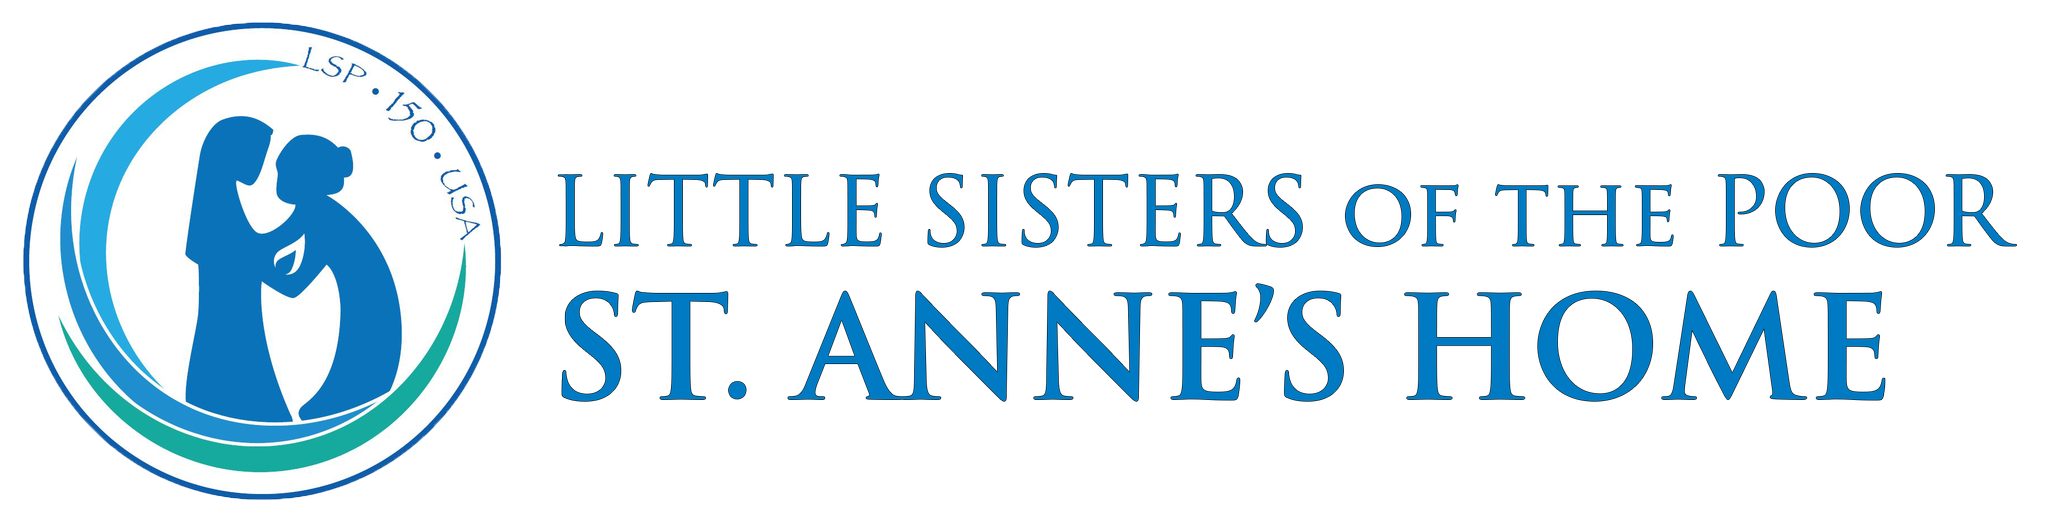 Little Sisters of the Poor San Francisco